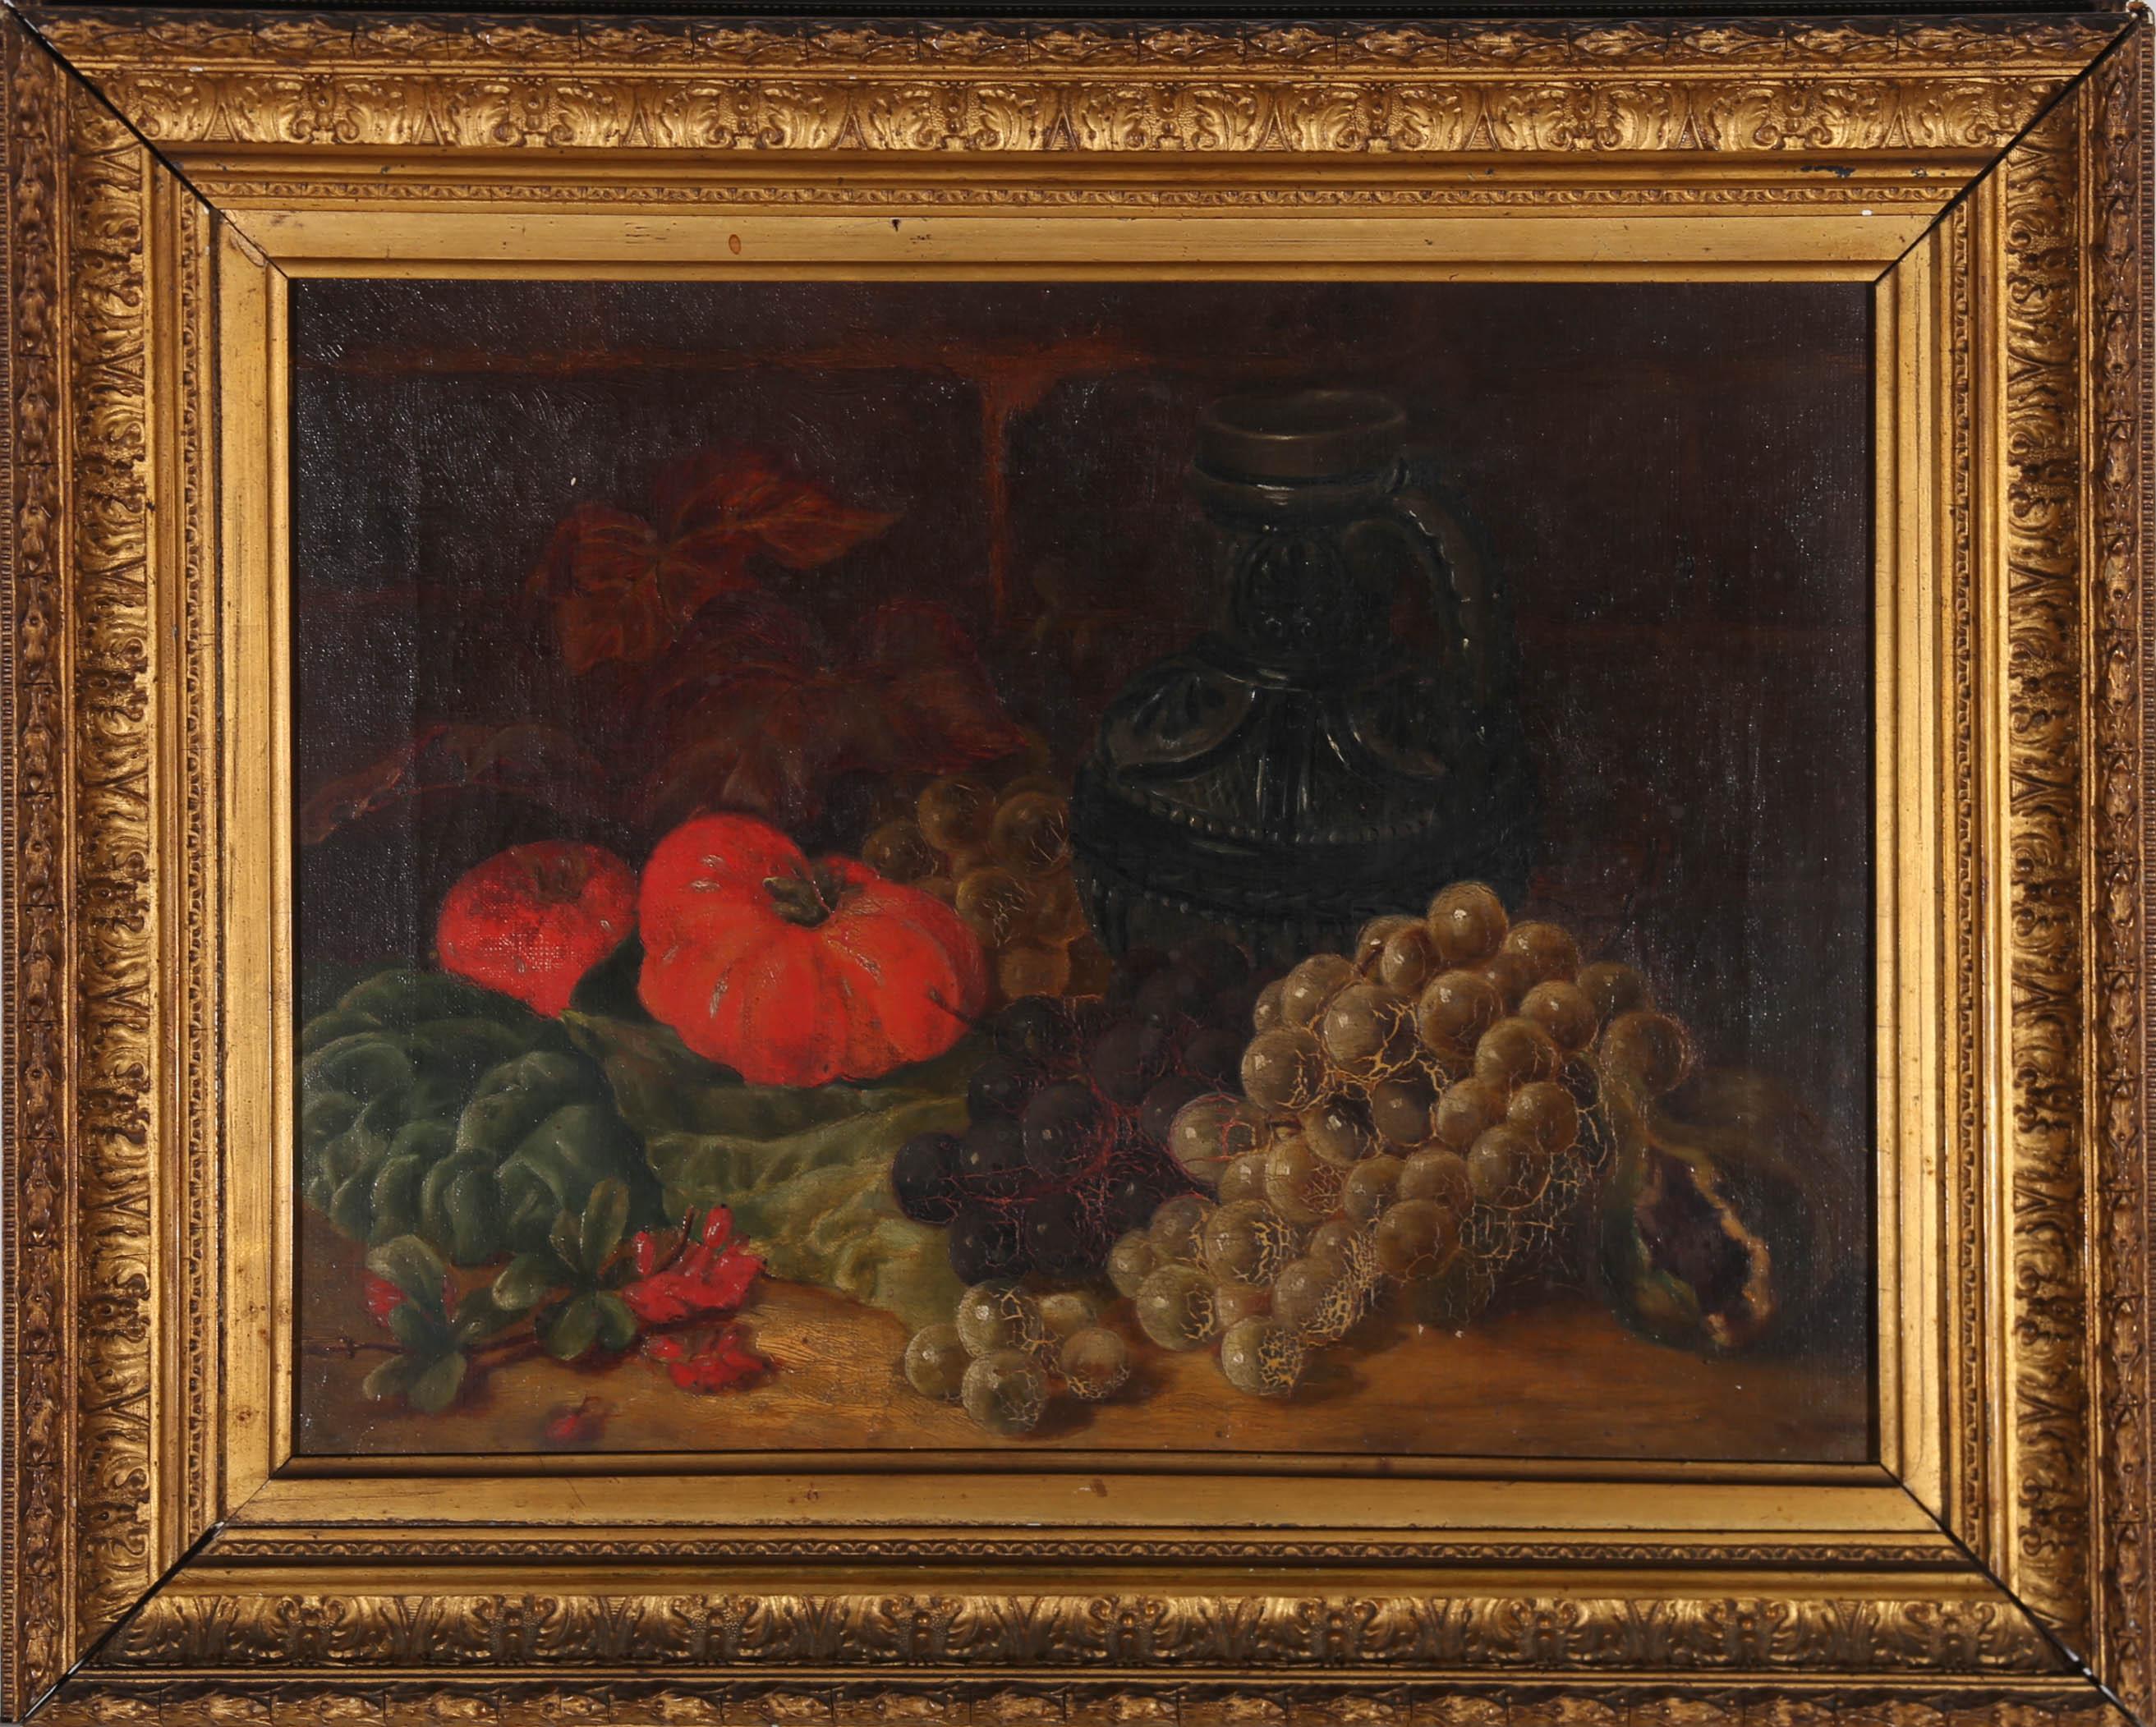 This Dutch inspired still life depicts a luxurious display of fruit and vegetables arranged amongst autumn foliage, and a decorative flagon decanter. Unsigned. The painting is beautifully presented in elaborate gilt frame and slip, with moulded cove